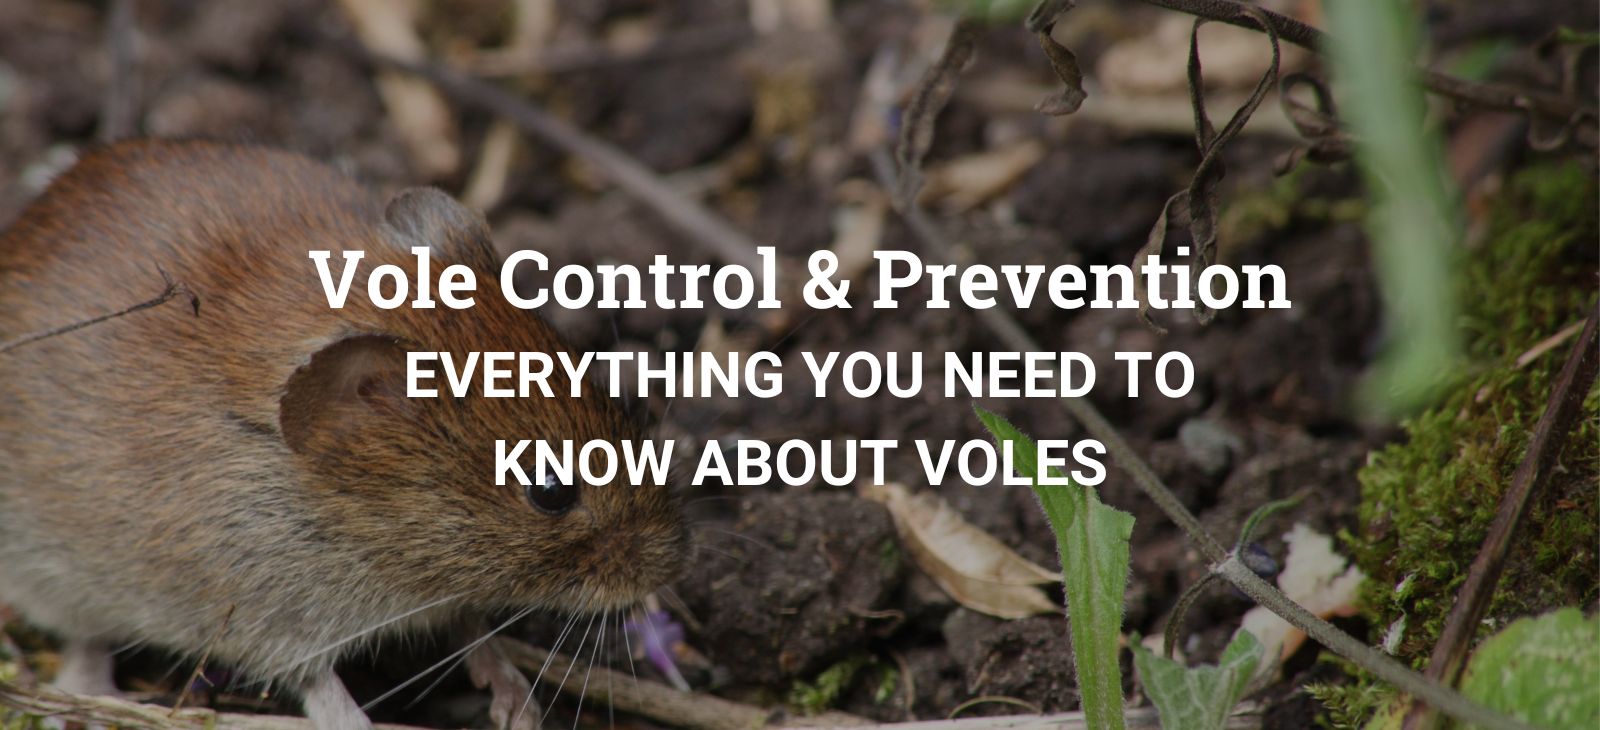 Vole Control And Prevention In Bozeman, MT thumbnail